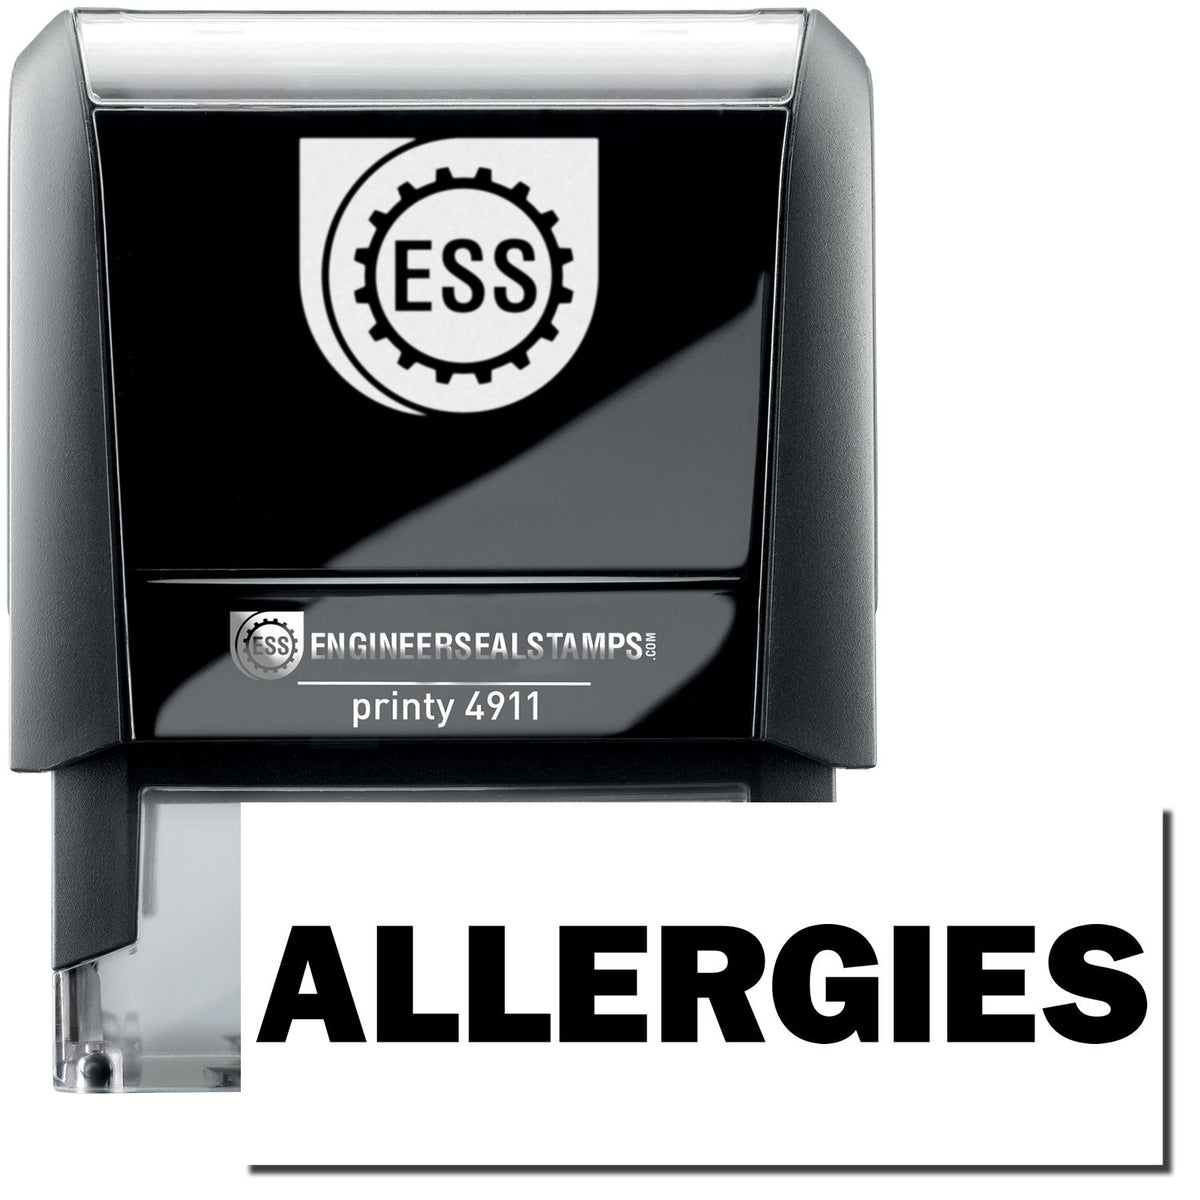 A self-inking stamp with a stamped image showing how the text &quot;ALLERGIES&quot; is displayed after stamping.